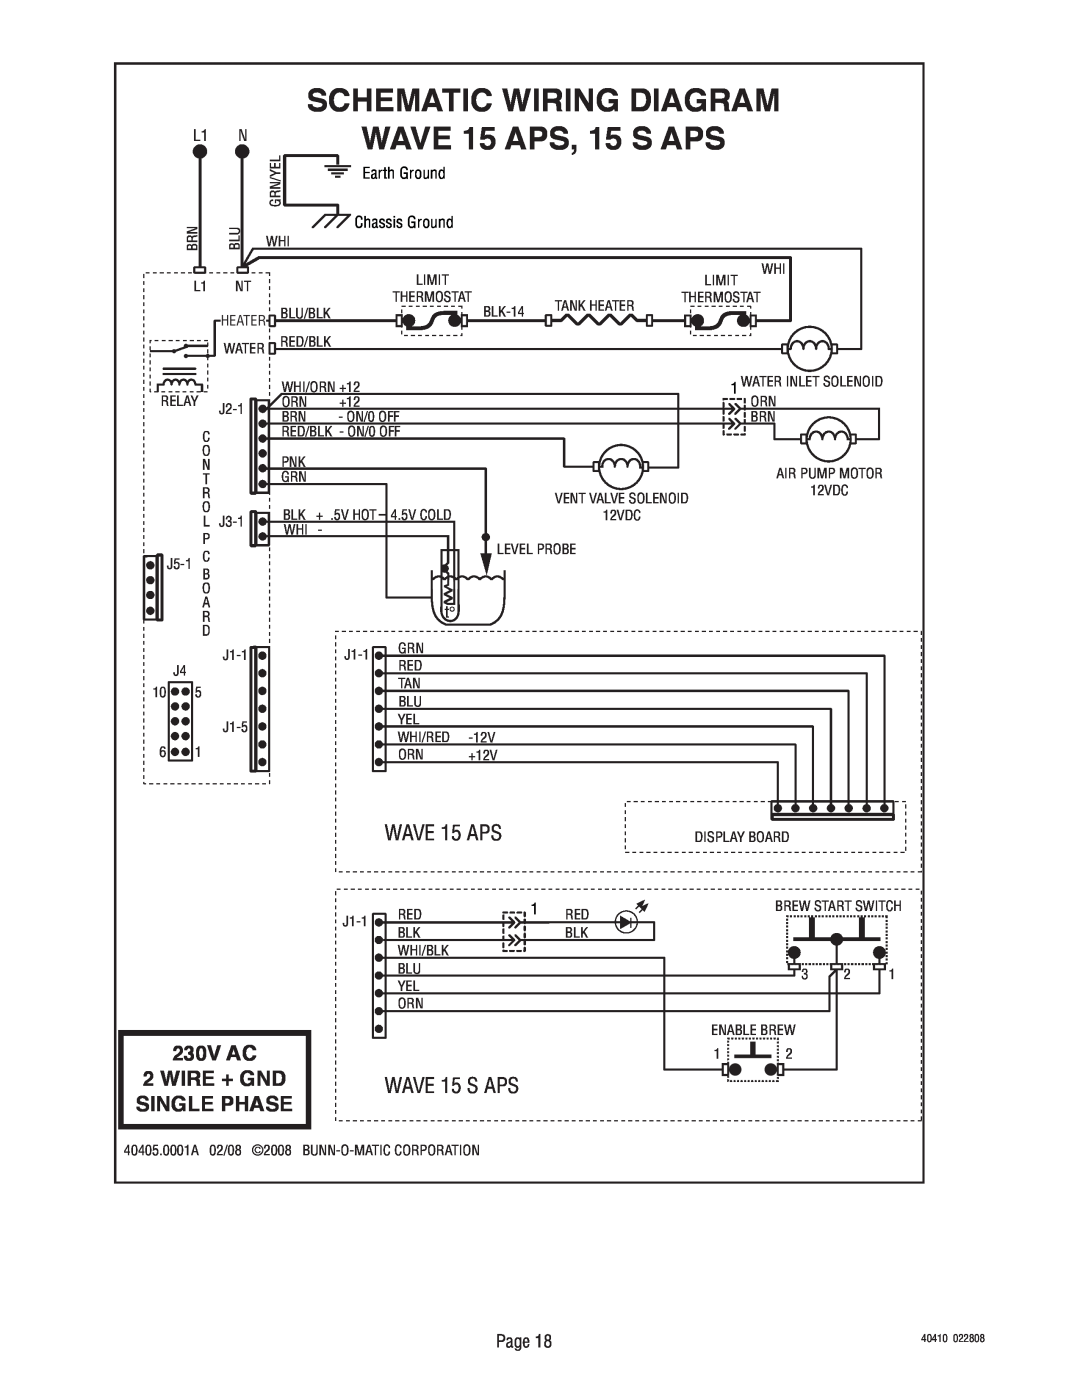 Bunn 40410.0000G Schematic Wiring Diagram, WAVE 15 APS, 15 S APS, Wire + Gnd, Single Phase, 230V AC, Earth Ground 